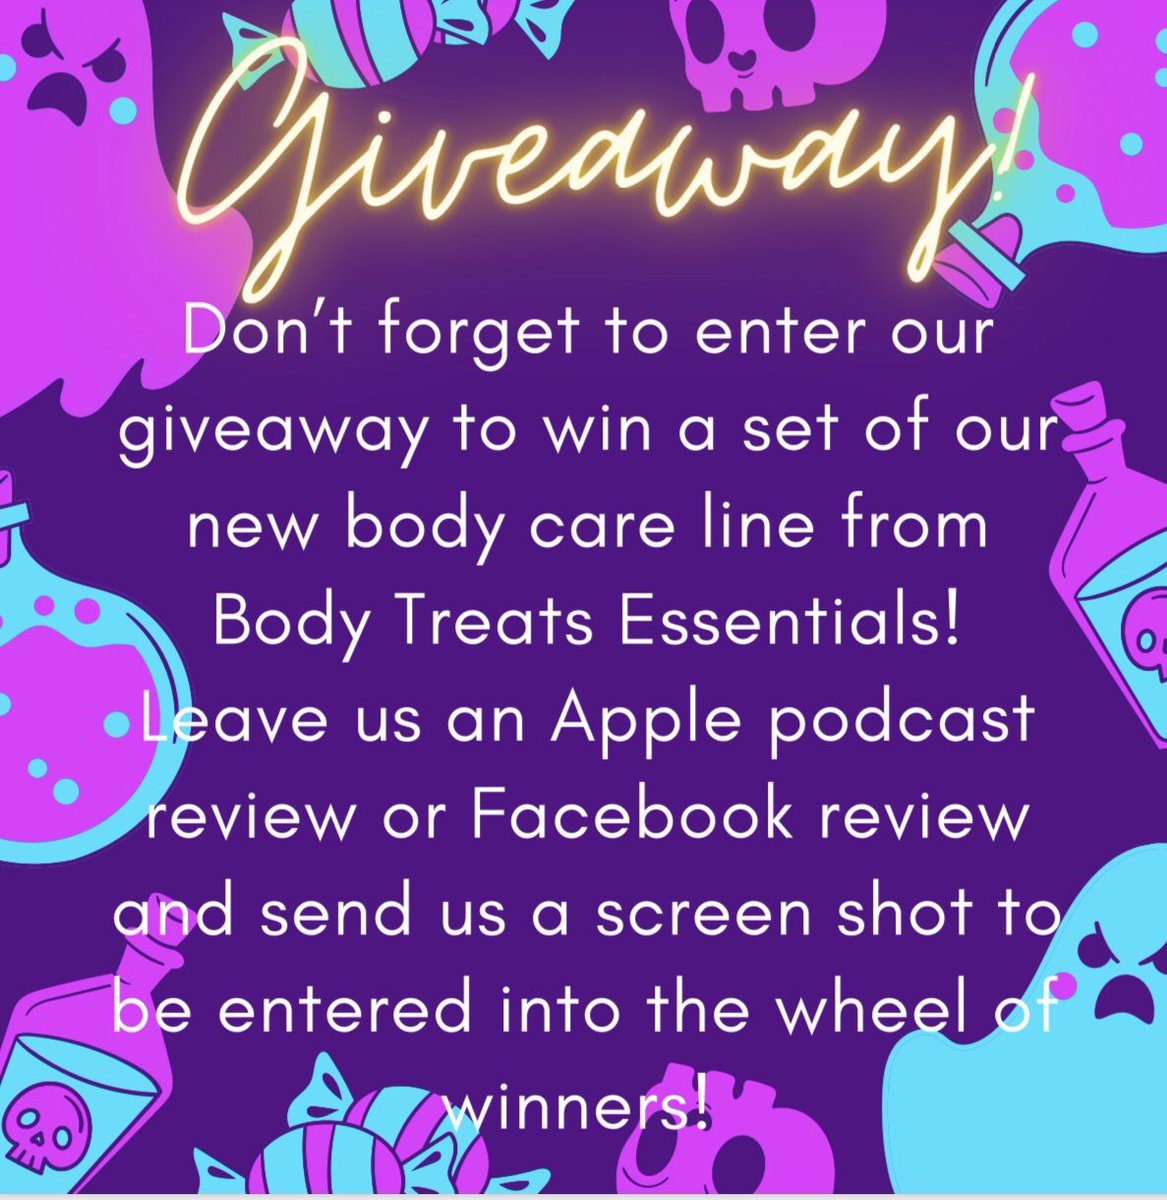 Giveaway alert!!! Two winners will receive our whole body care line! Leave us a review and DM us a screen shot. #giveaway #bodycare #truecrime #truecrimepodcast #podcast #bodycareessentials #ateacherandacrimescenetech